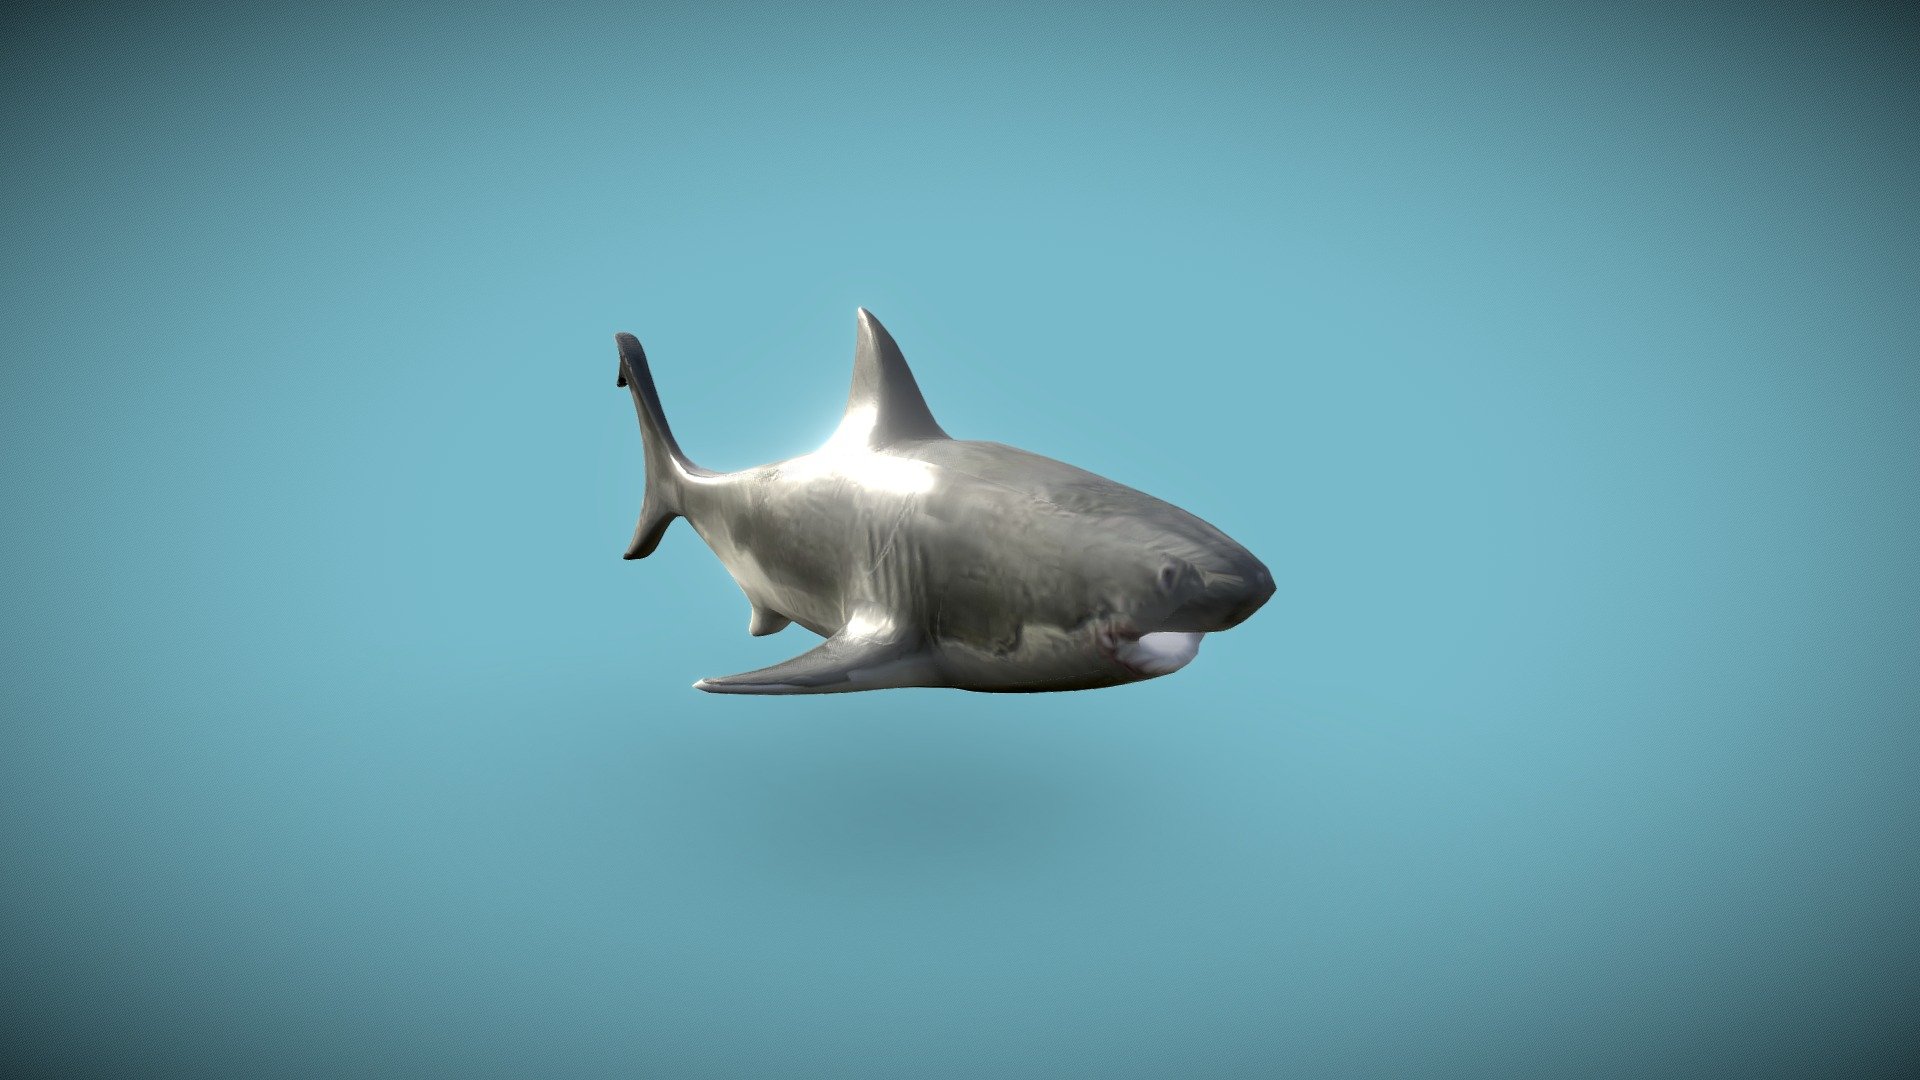 Shark Model :
This model was made in 1h inside of Blender. All the texture where made from the main referece. Everything was done in blender !
the texture resolution is 1k. Every PBR map where generated using blender shader editor 3d model